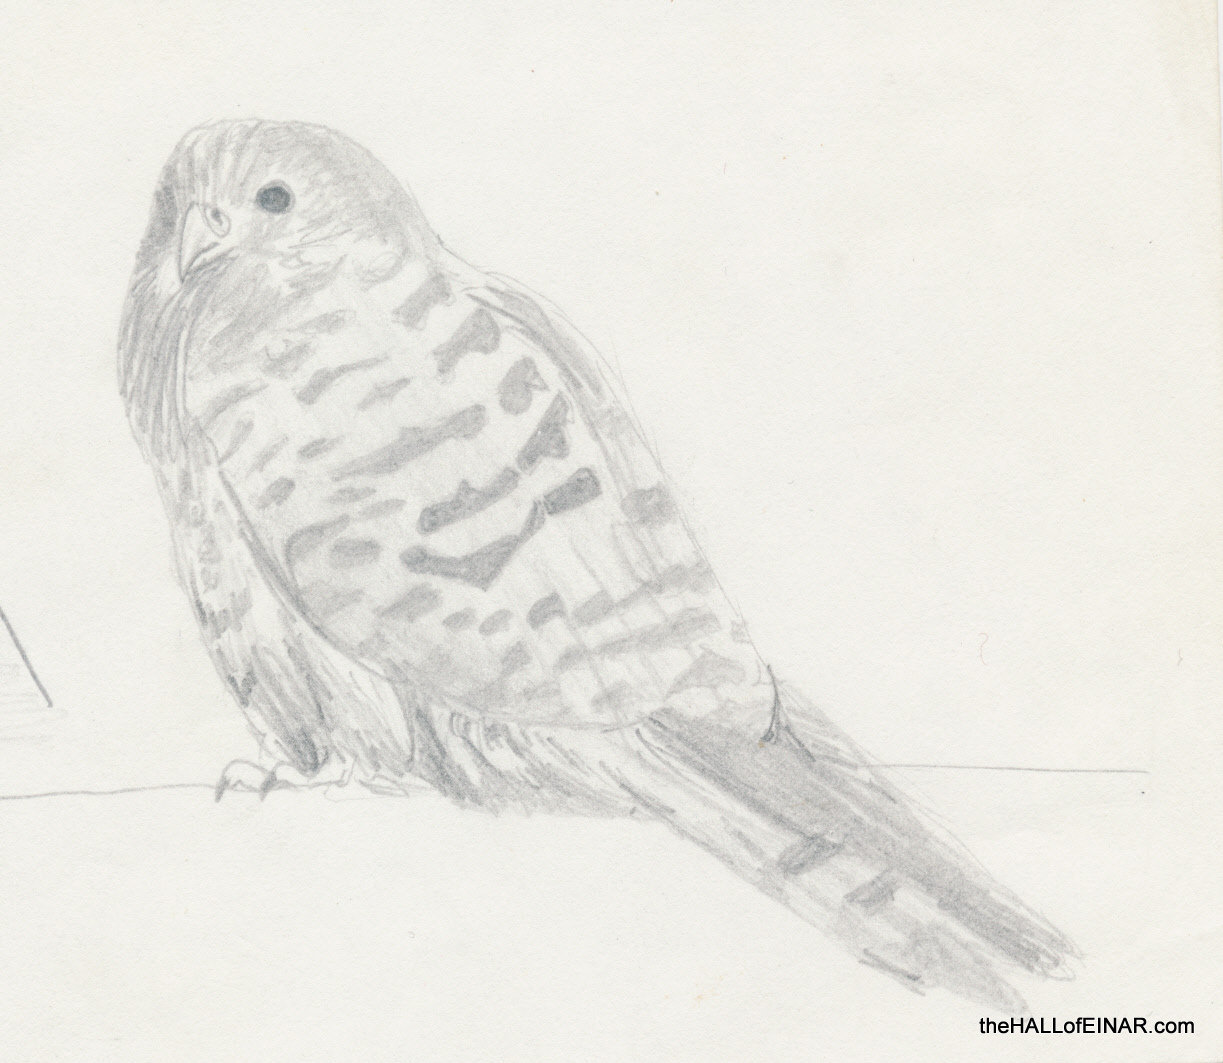 Kestrel - The Hall of Einar - drawing (c) David Bailey (not the)